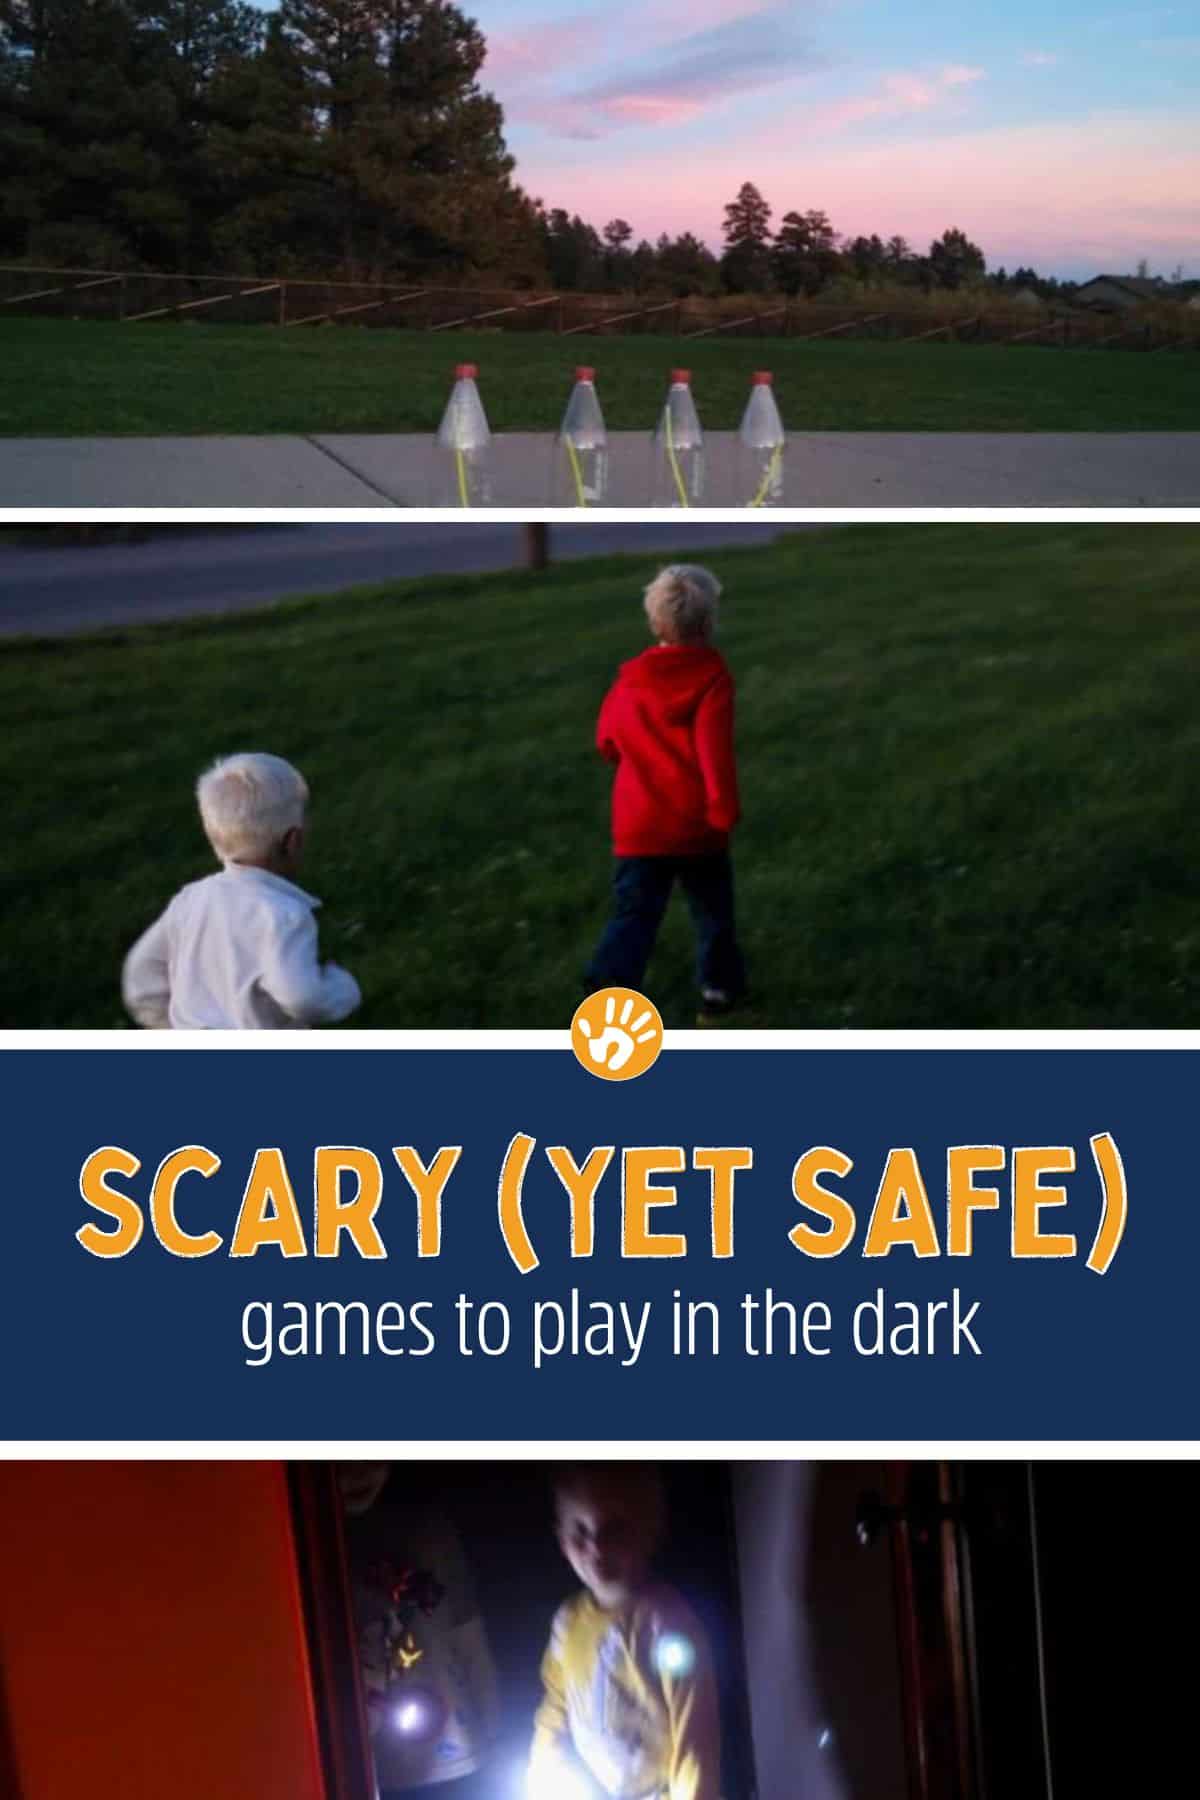 Fun Scary Games to Play at Night